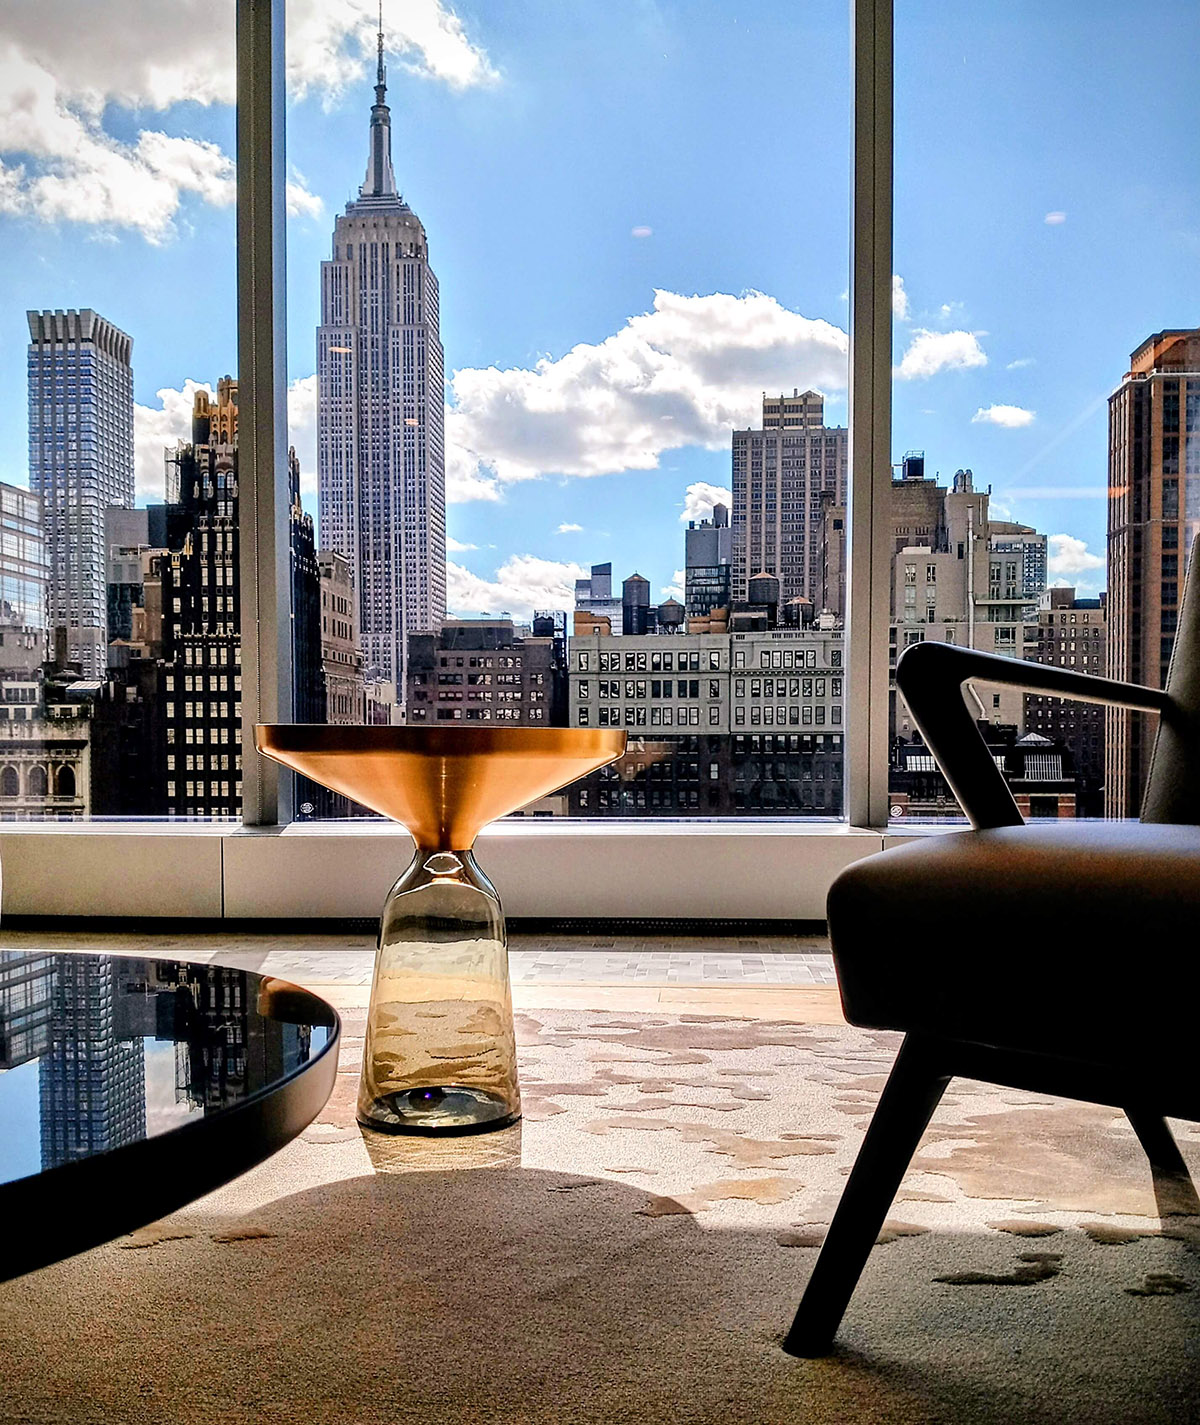 NYC skyline from a luxury apartment